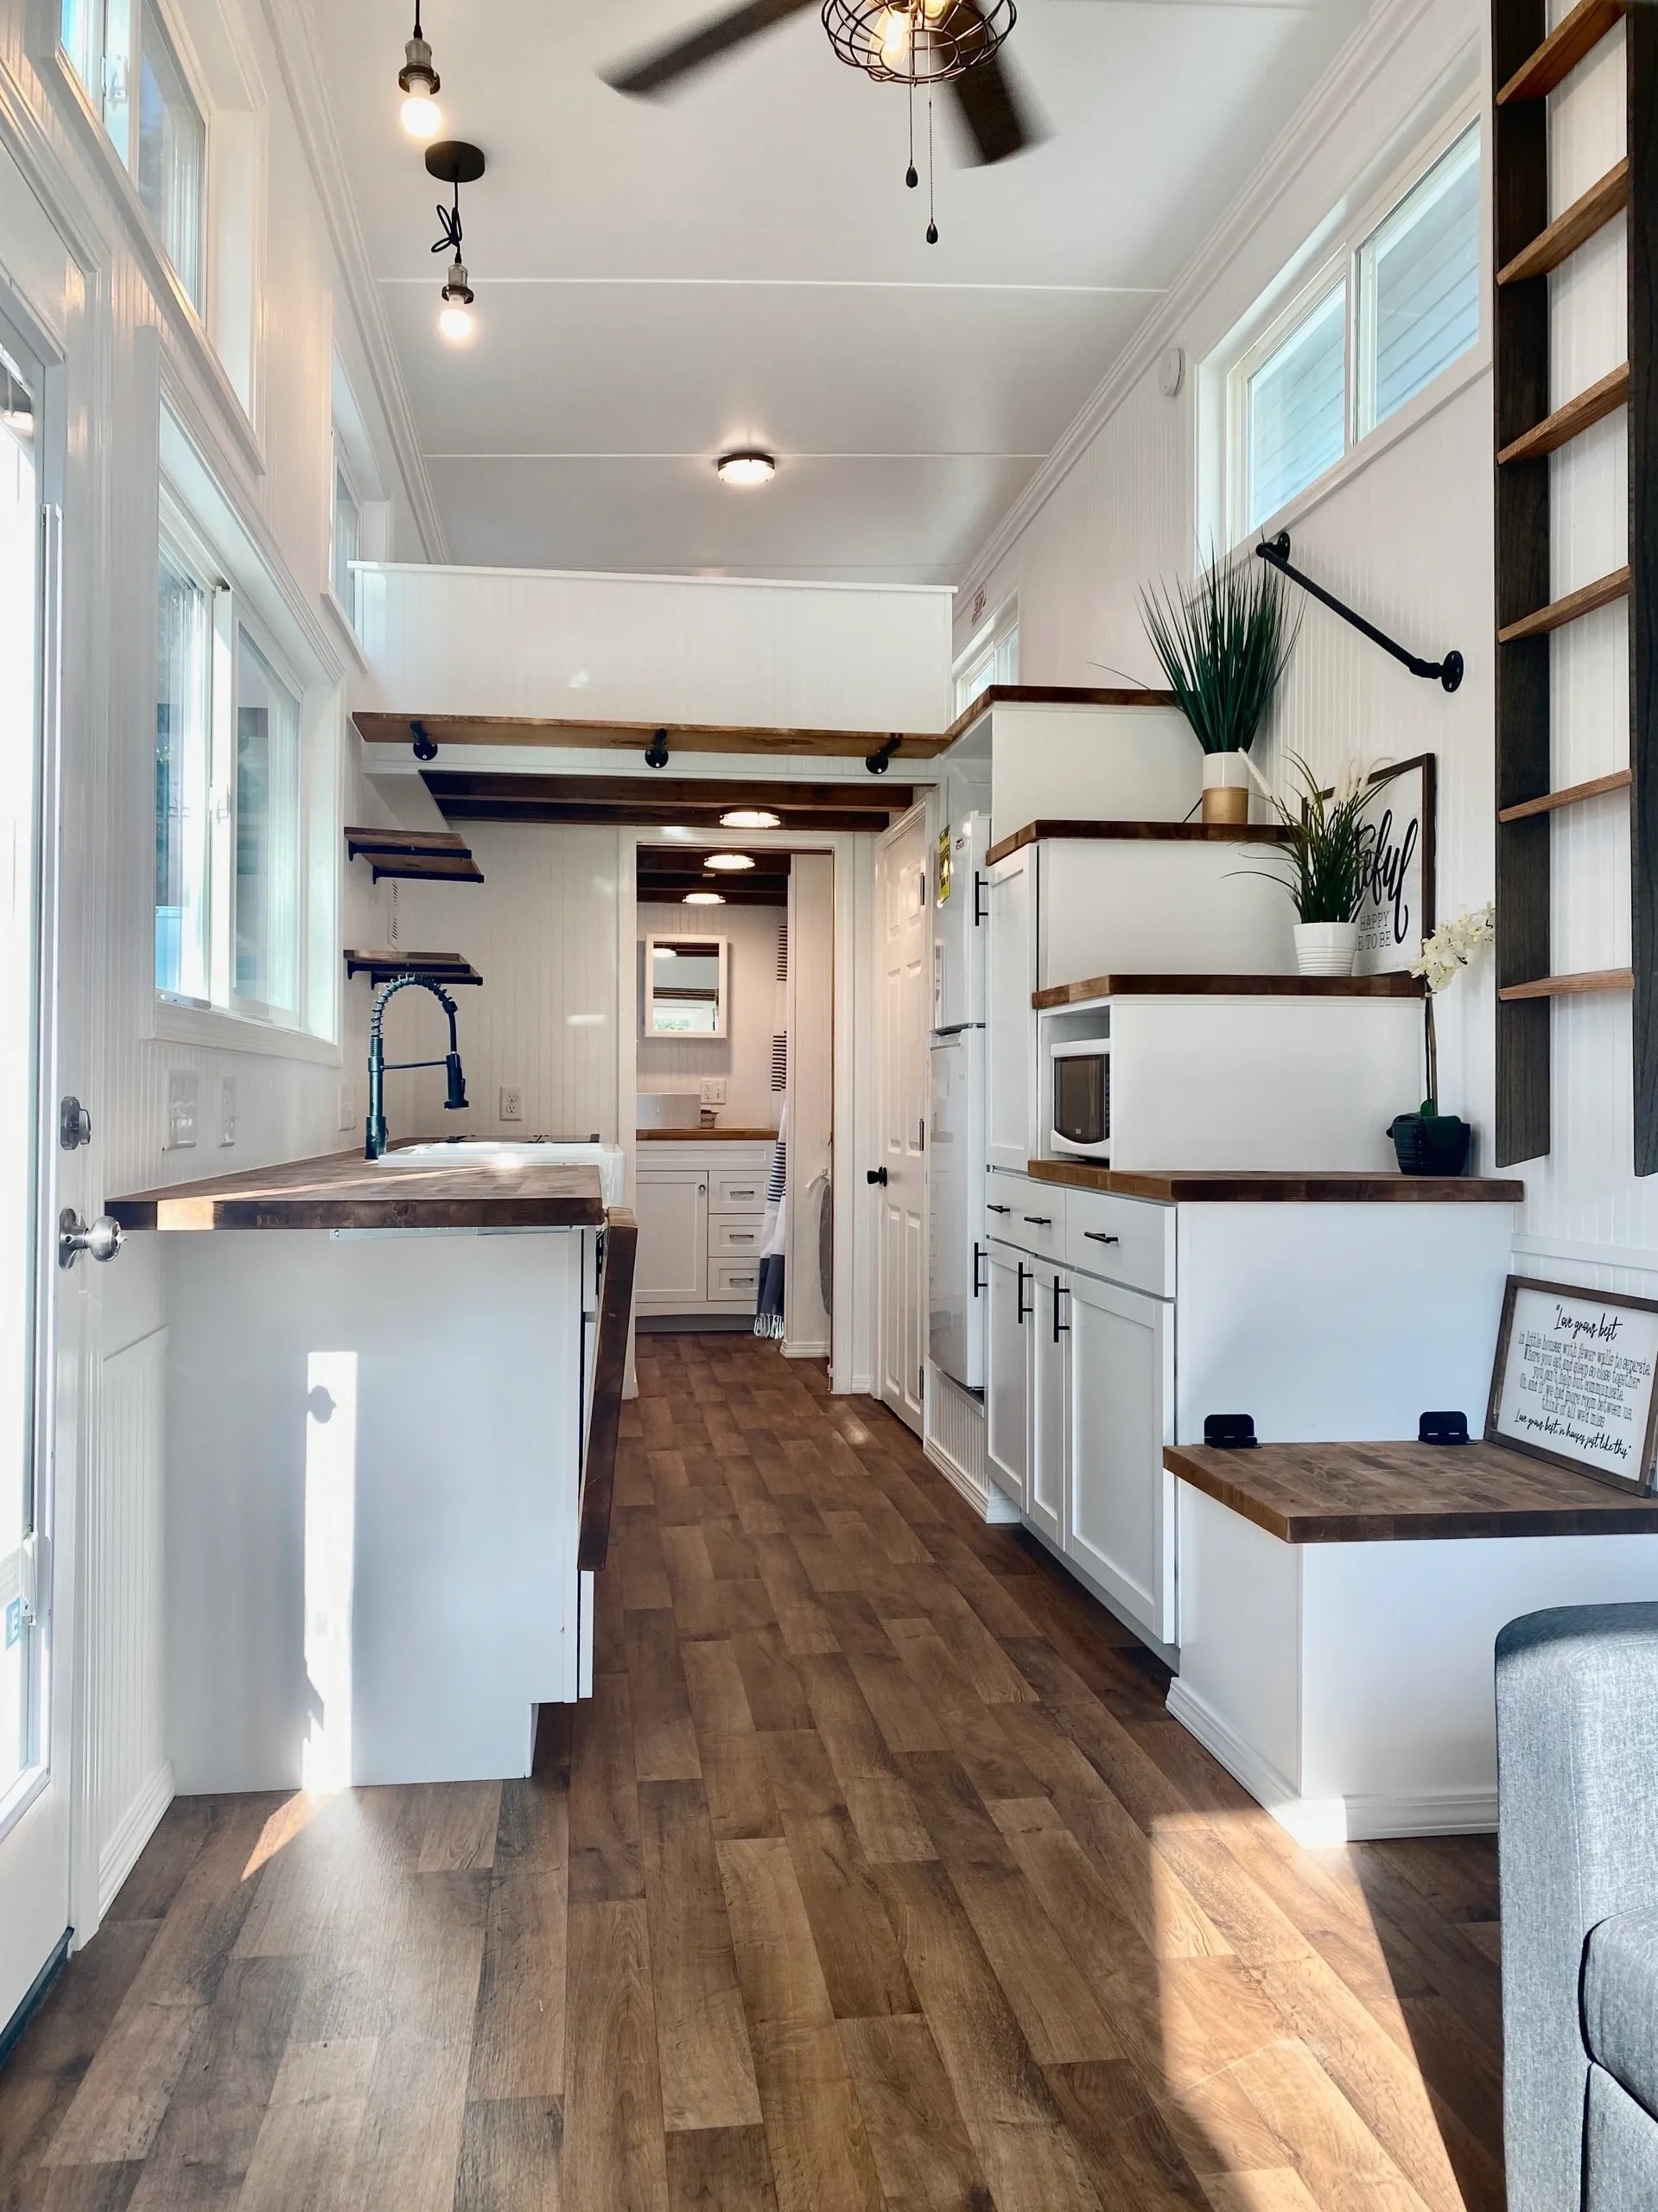 The Big Easy Is A Spacious Tiny House With Downstairs Bedroom And Two